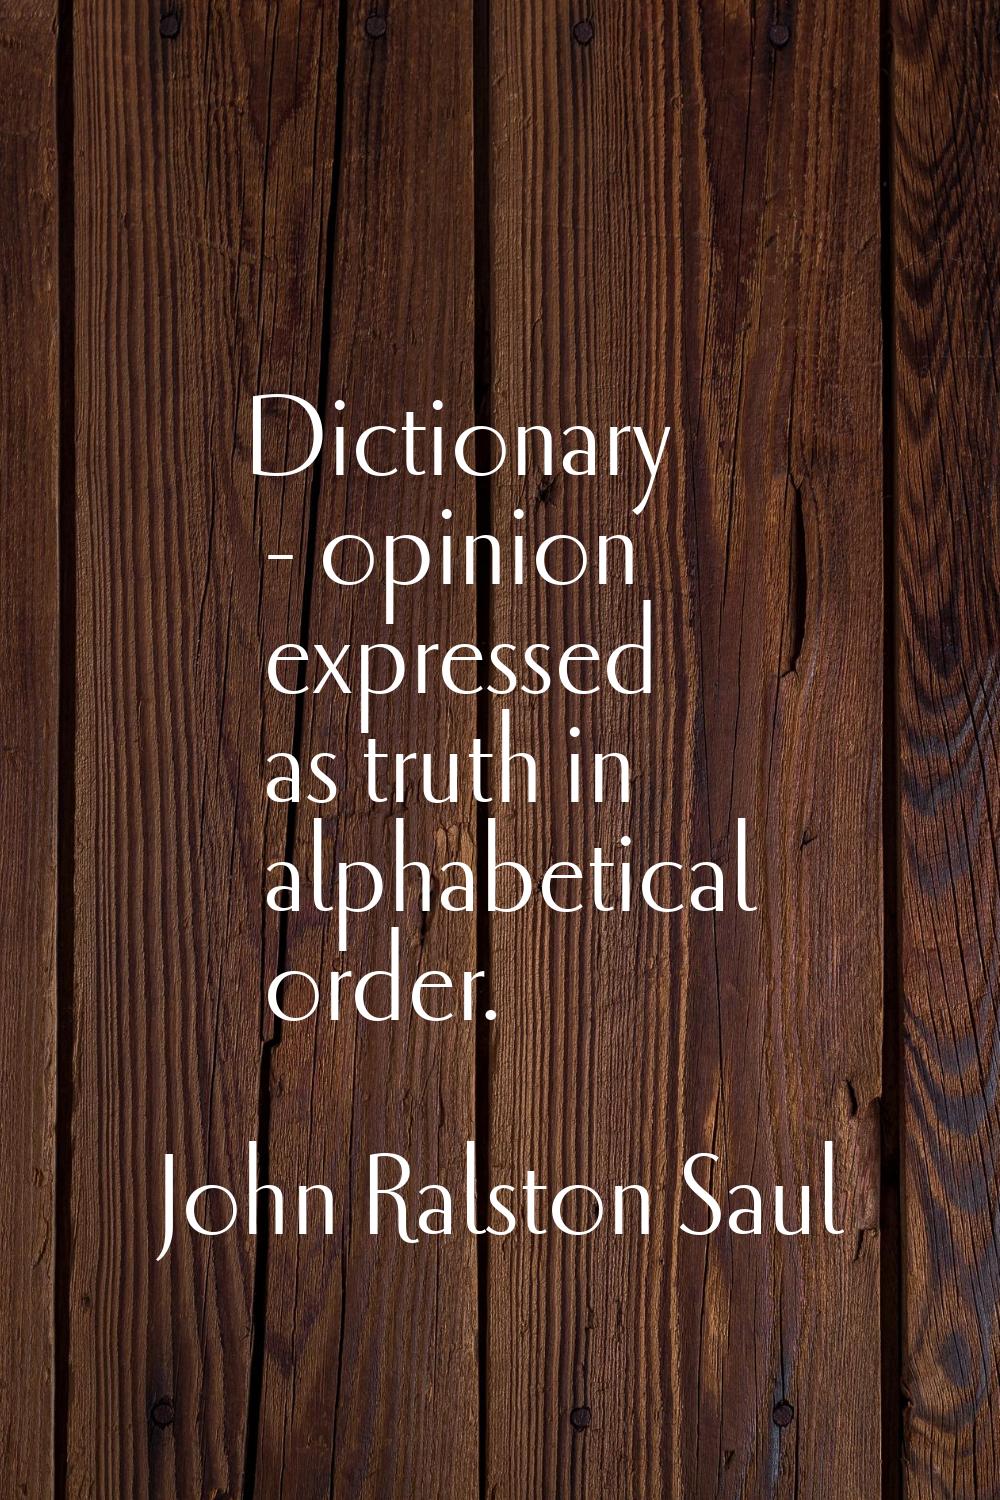 Dictionary - opinion expressed as truth in alphabetical order.